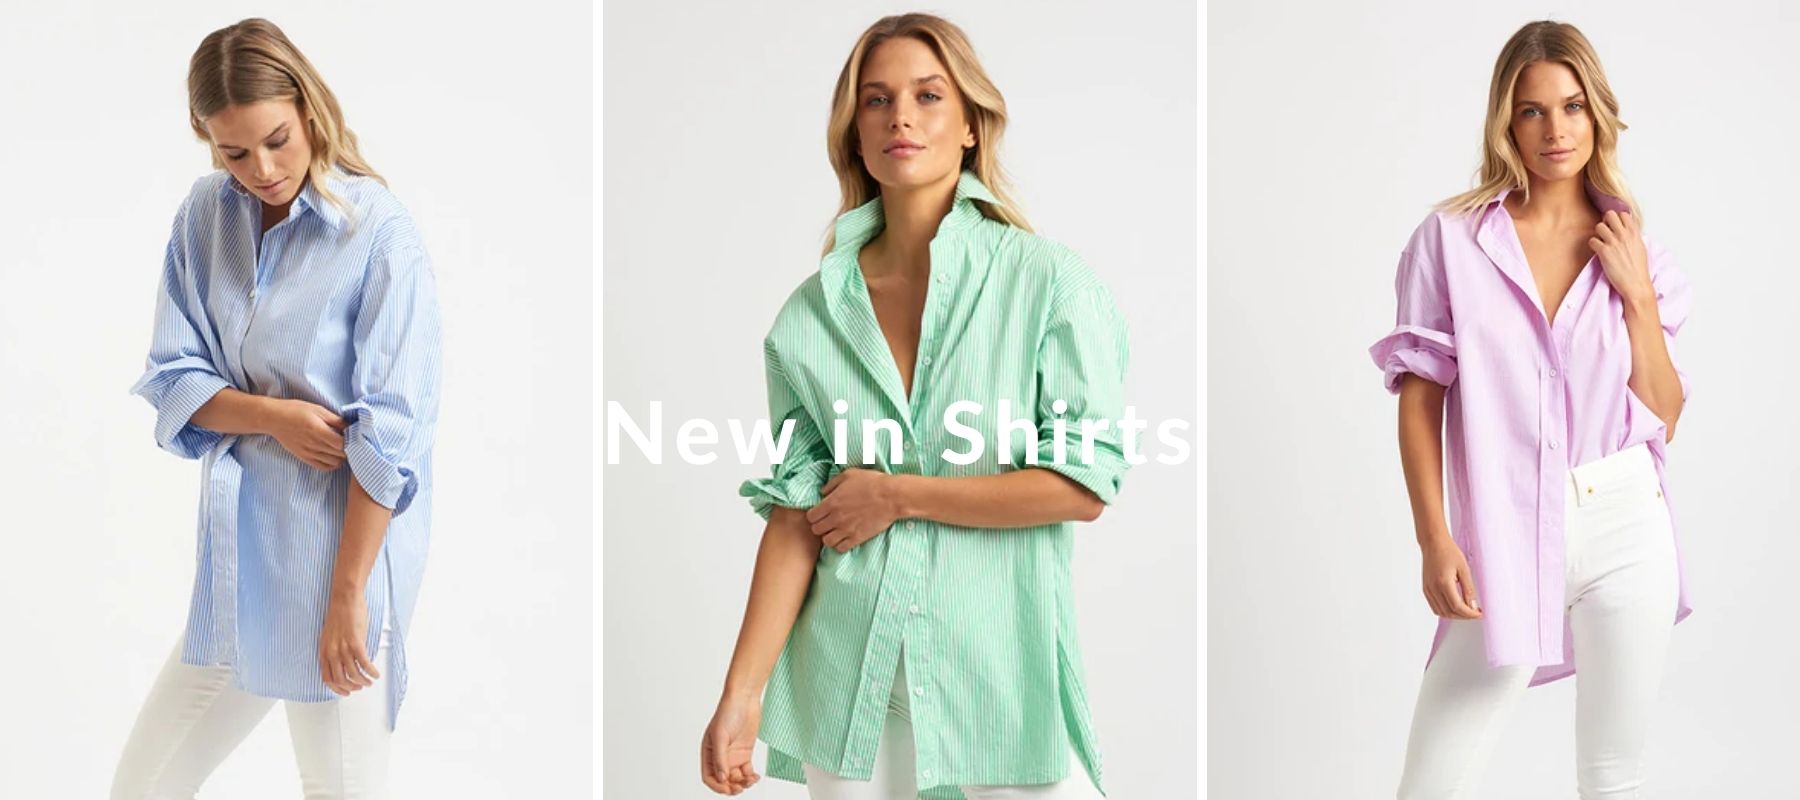 Ollie and Max cotton and linen shirts size 8 to size 24. Longer length, flattering to womens shapes and plus size. Comfortable shirts 